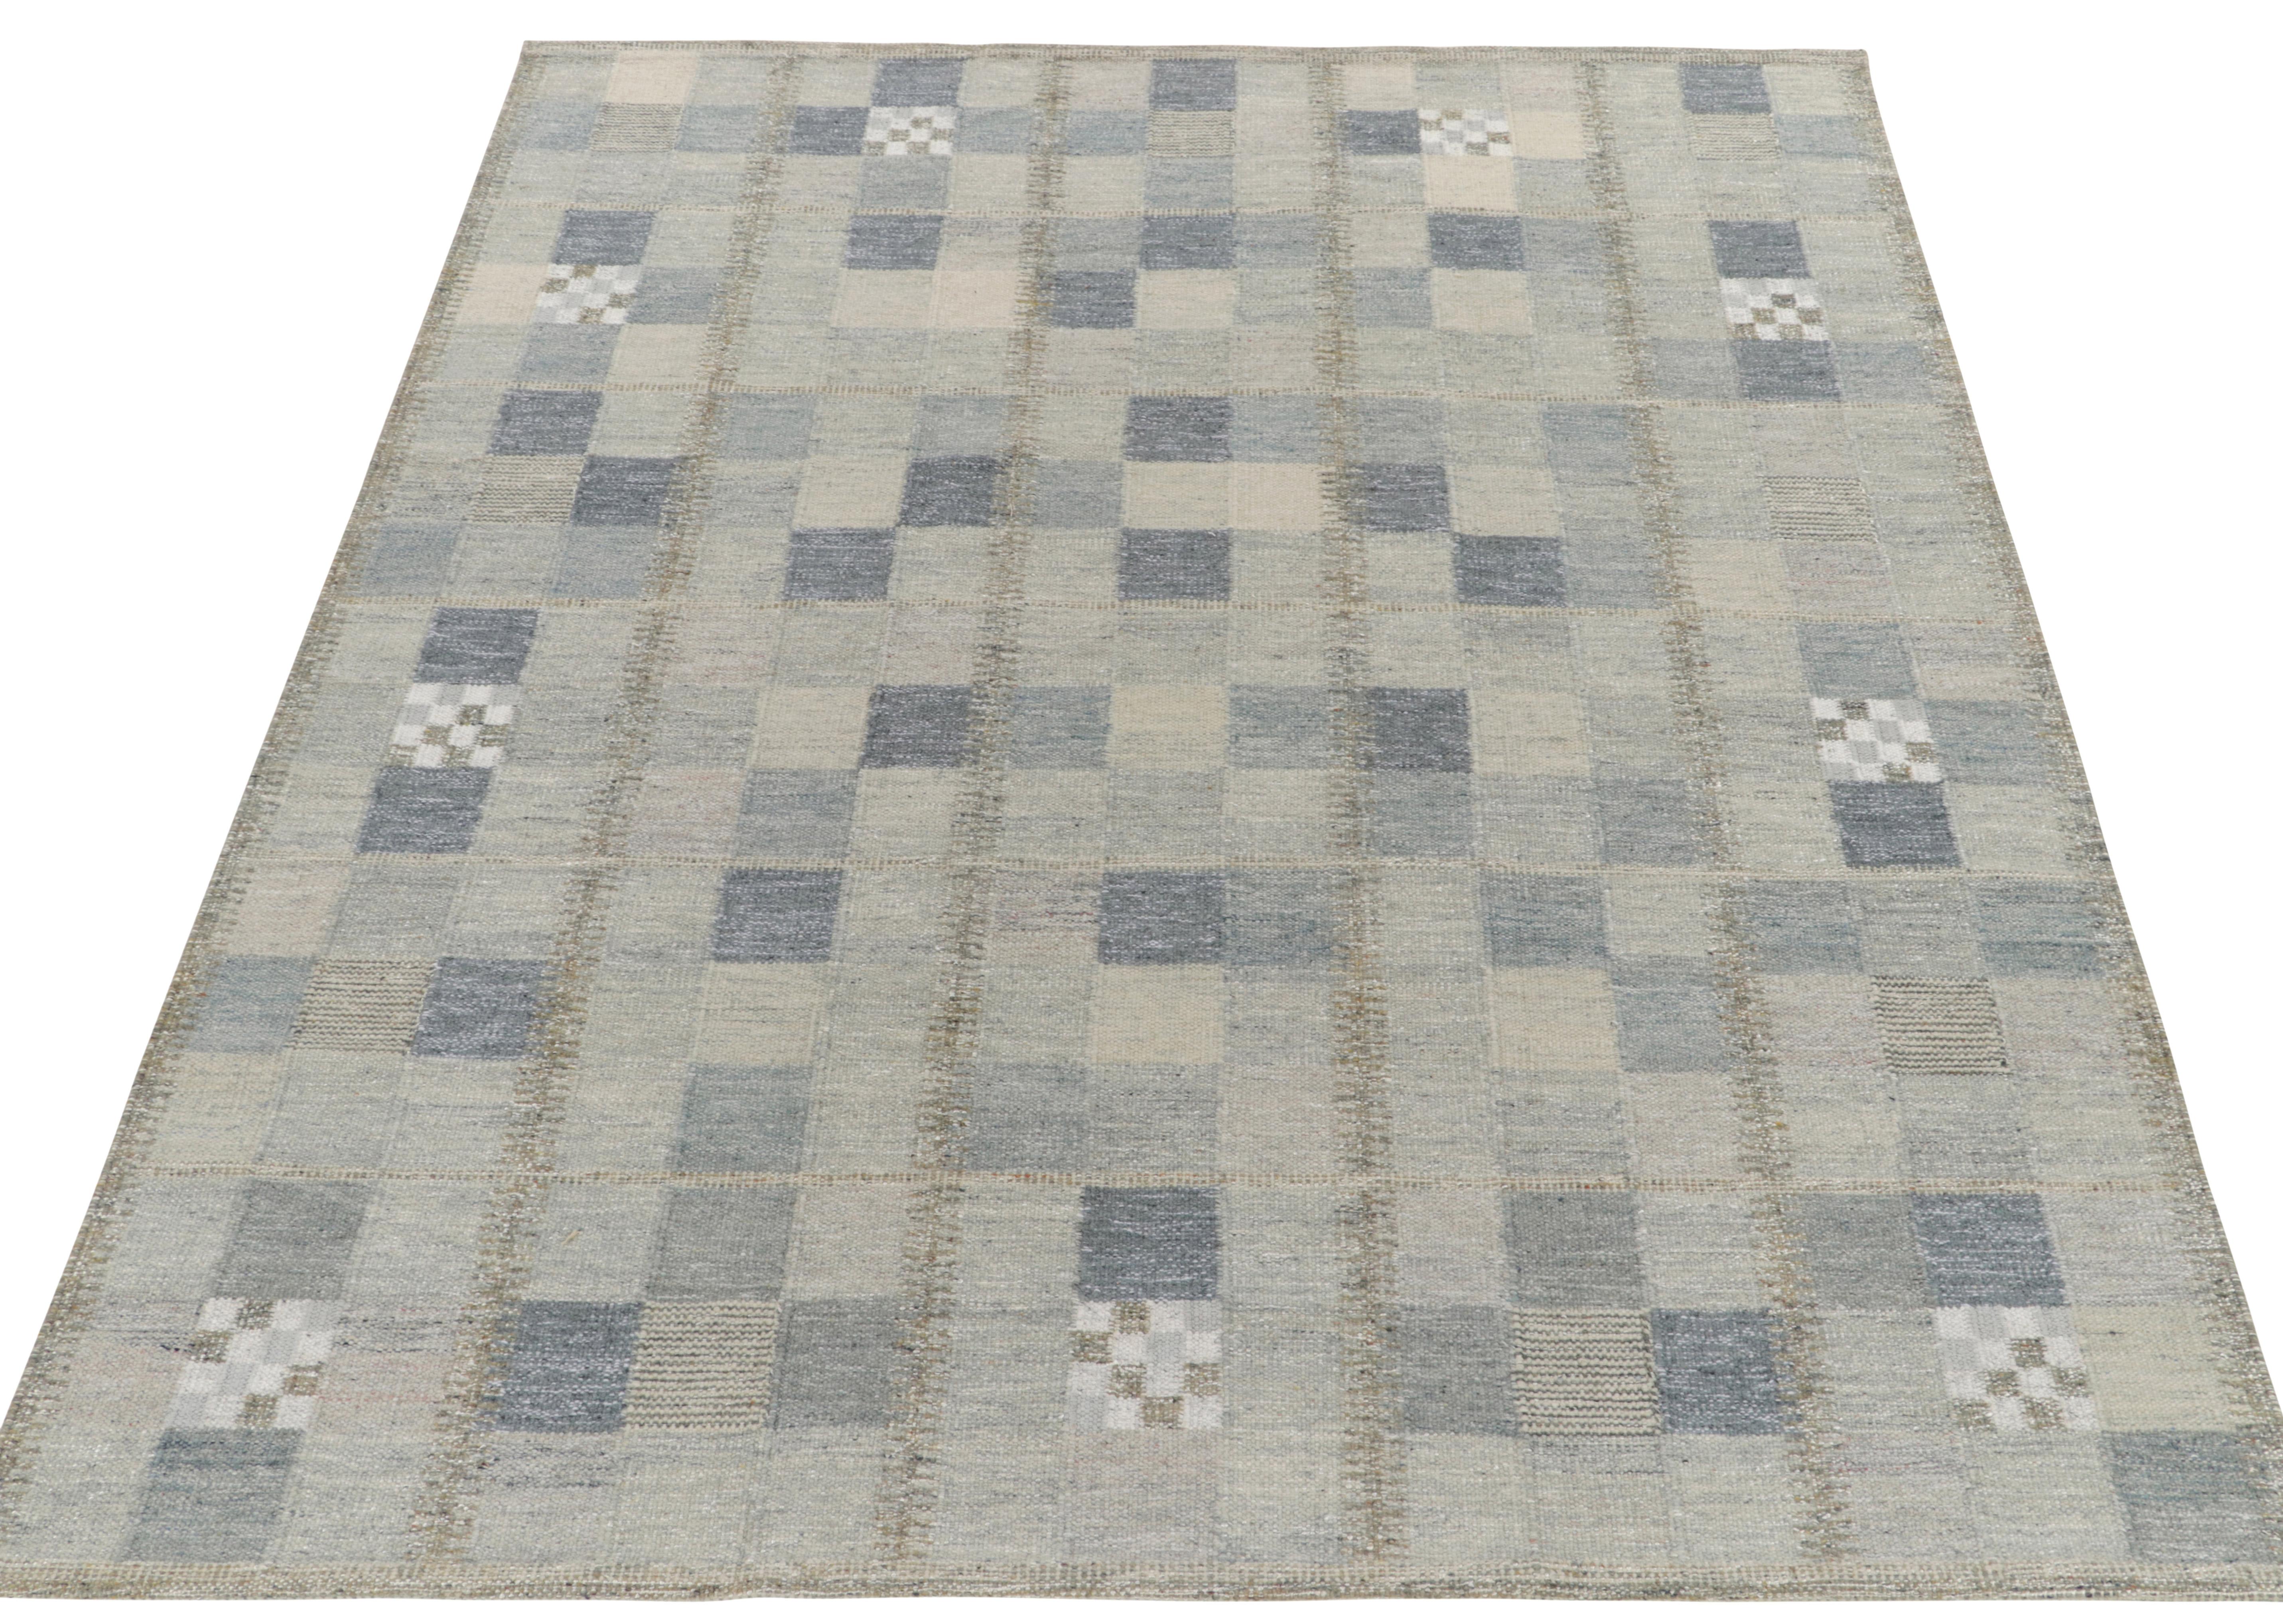 Exemplifying a modern take on Swedish styles, an 8x10 flat weave from Rug & Kilim’s award-winning Scandinavian Kilim collection. The handwoven rug enjoys a smart application of geometry with well defined compartmentalisation entwining variegated